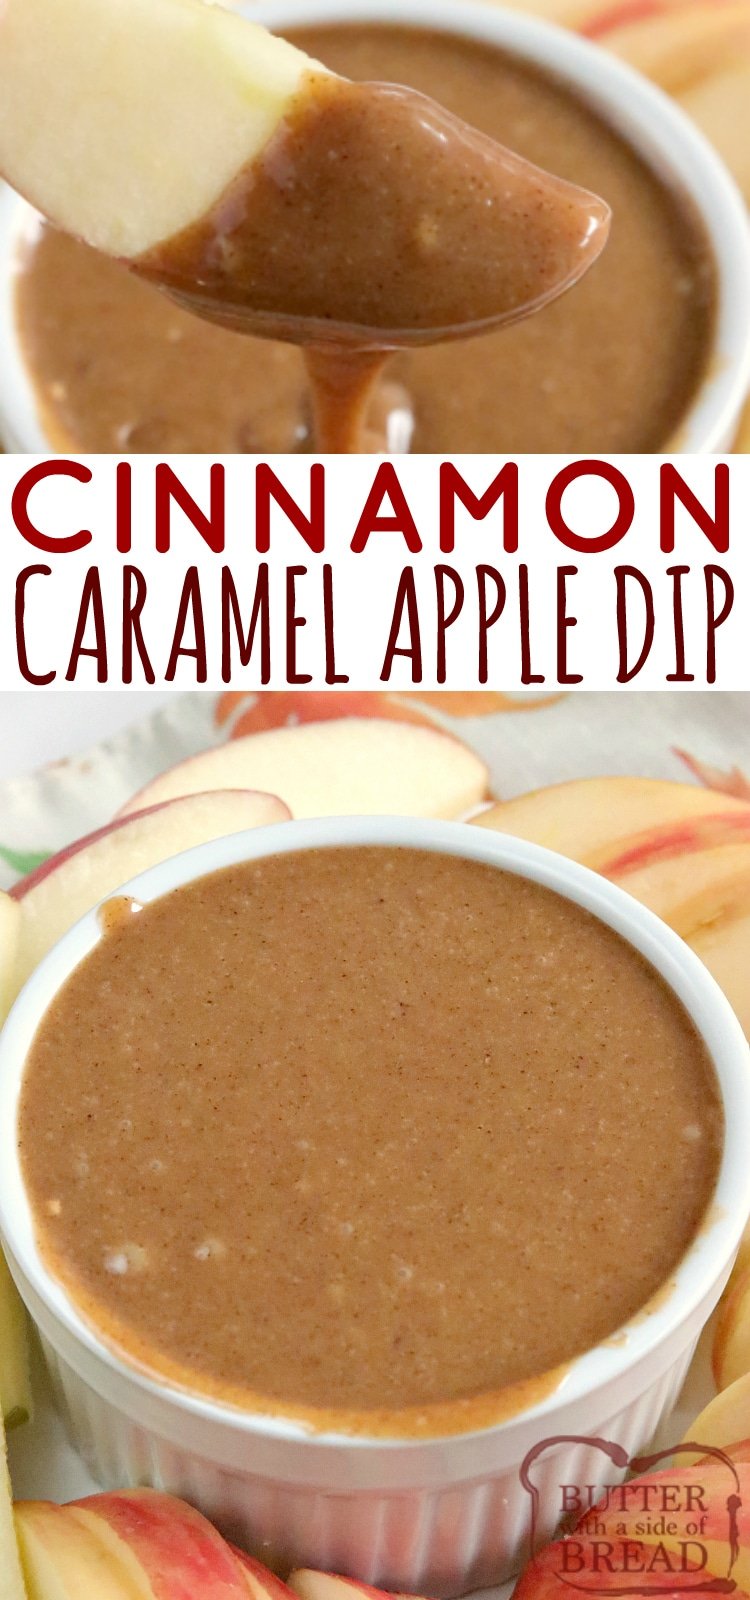 Cinnamon Caramel Apple Dip is made with only 3 ingredients - sweetened condensed milk, butterscotch chips and lots of cinnamon! This easy caramel apple dip recipe is easy and delicious!